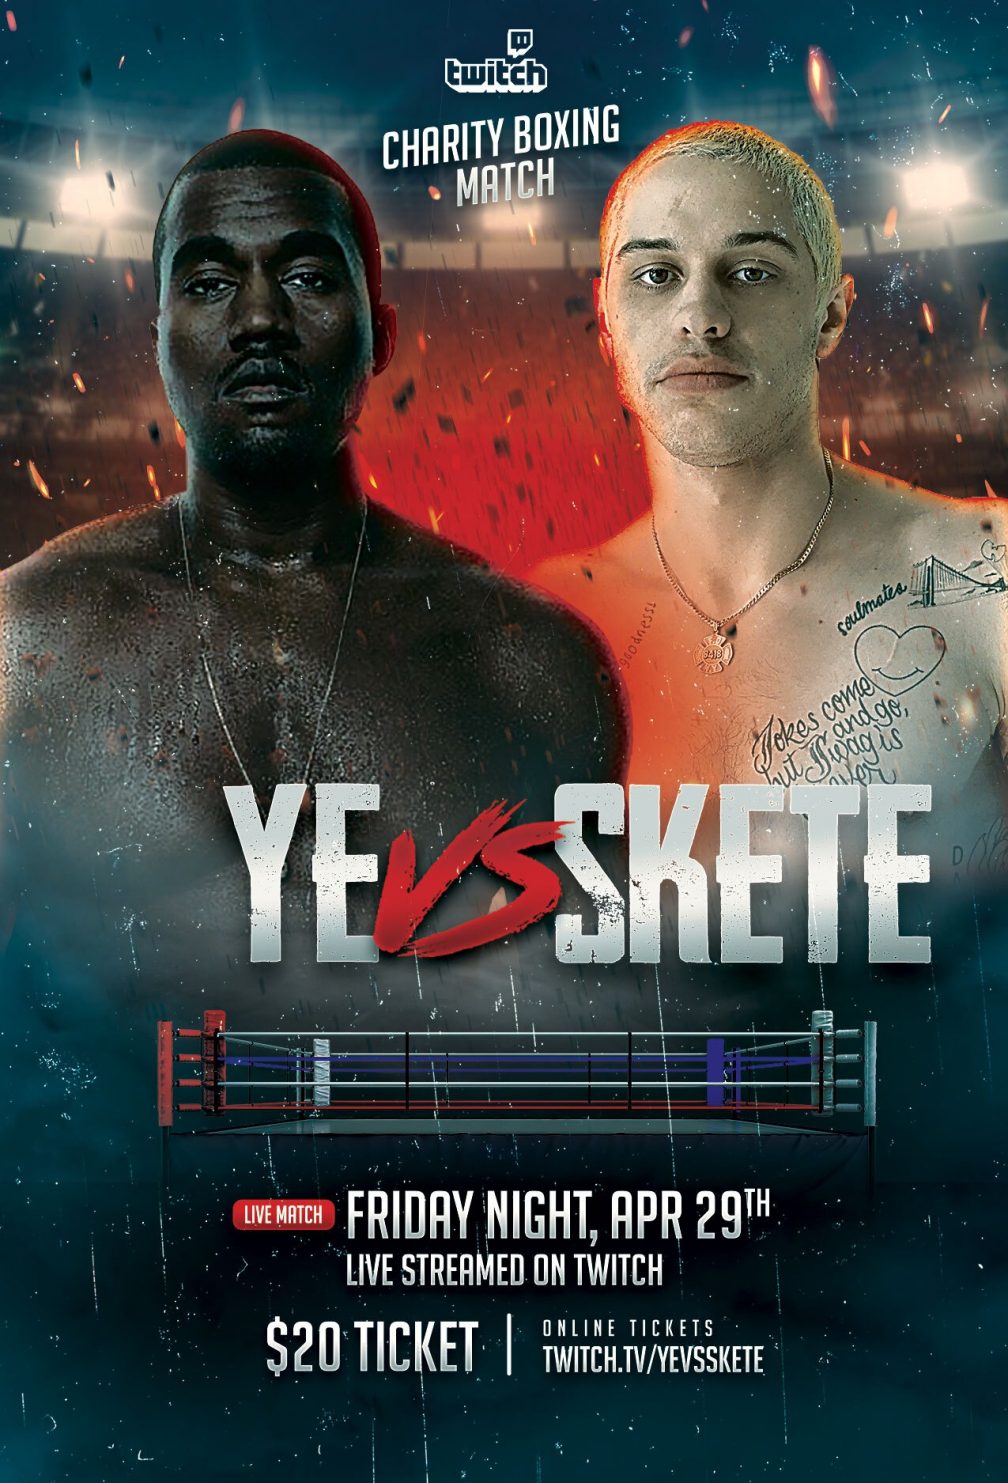 Kanye West and Pete Davidson to contest charity boxing match - News